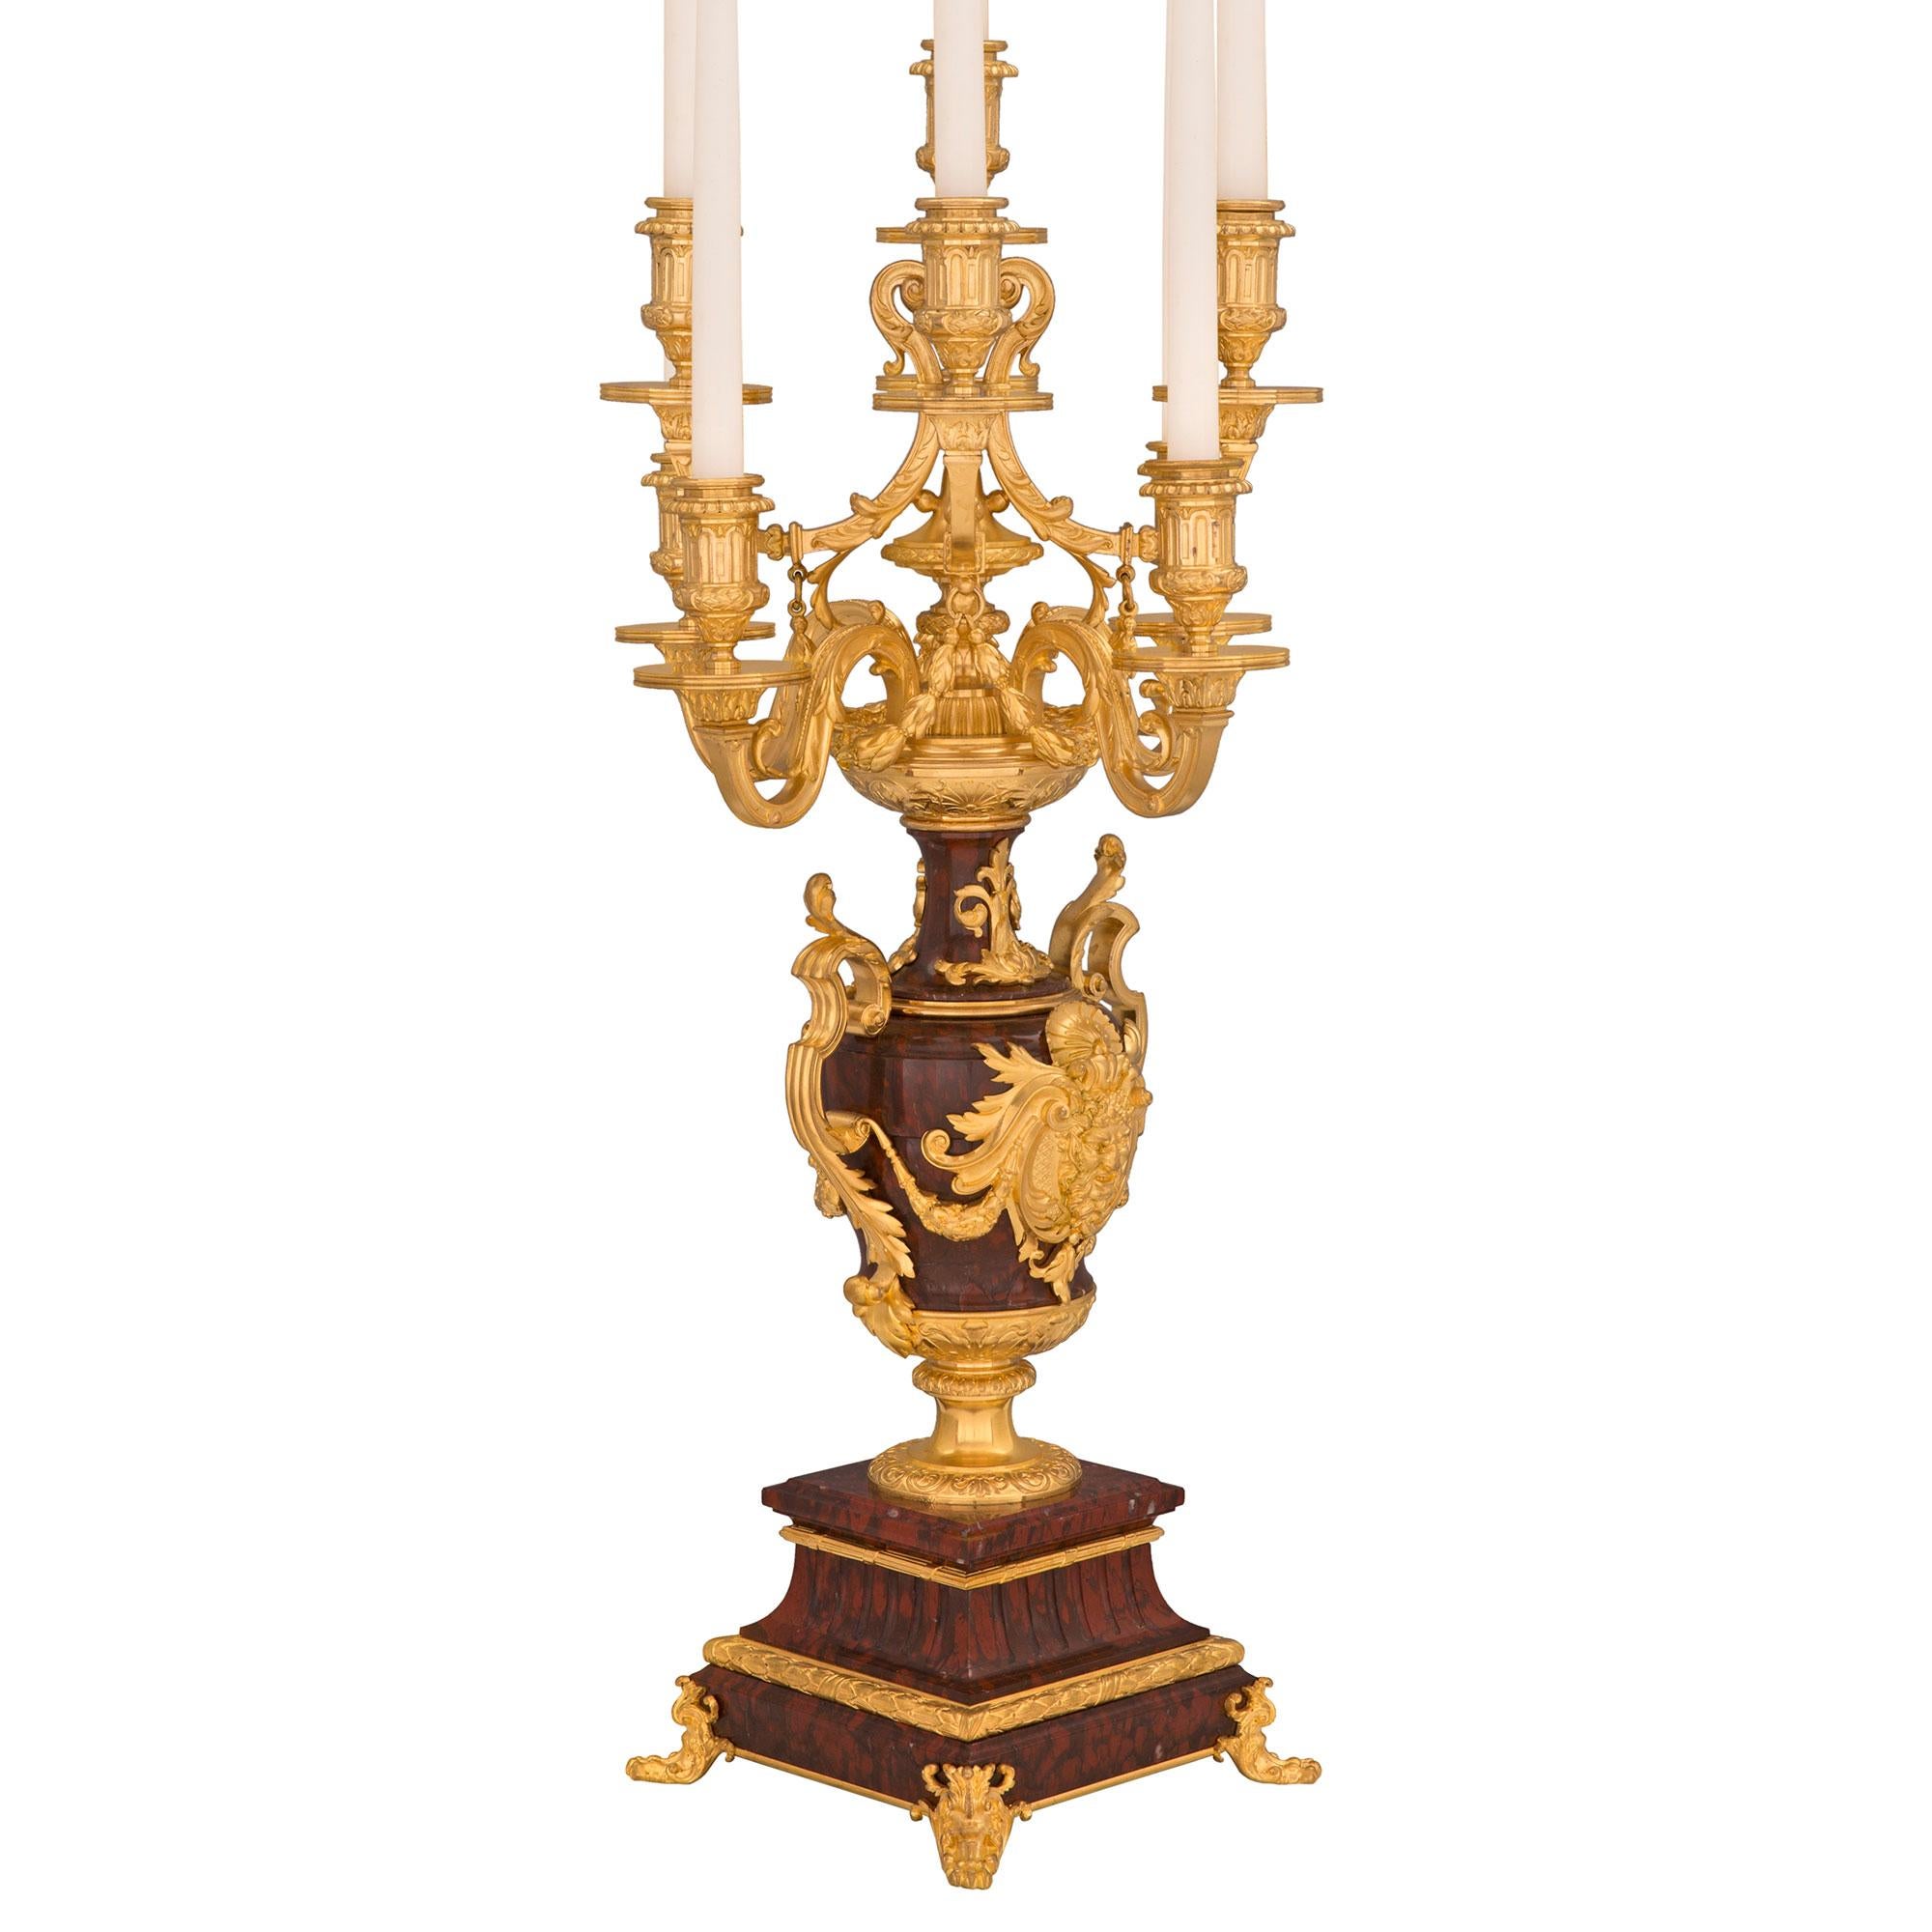 A superb quality and impressive large scale pair of French 19th century Renaissance st. Rouge Griotte and ormolu nine arm candelabras, signed F. Barbedienne. Each is raised by a square Rouge Griotte marble base with an ormolu ‘C’ scrolled support in